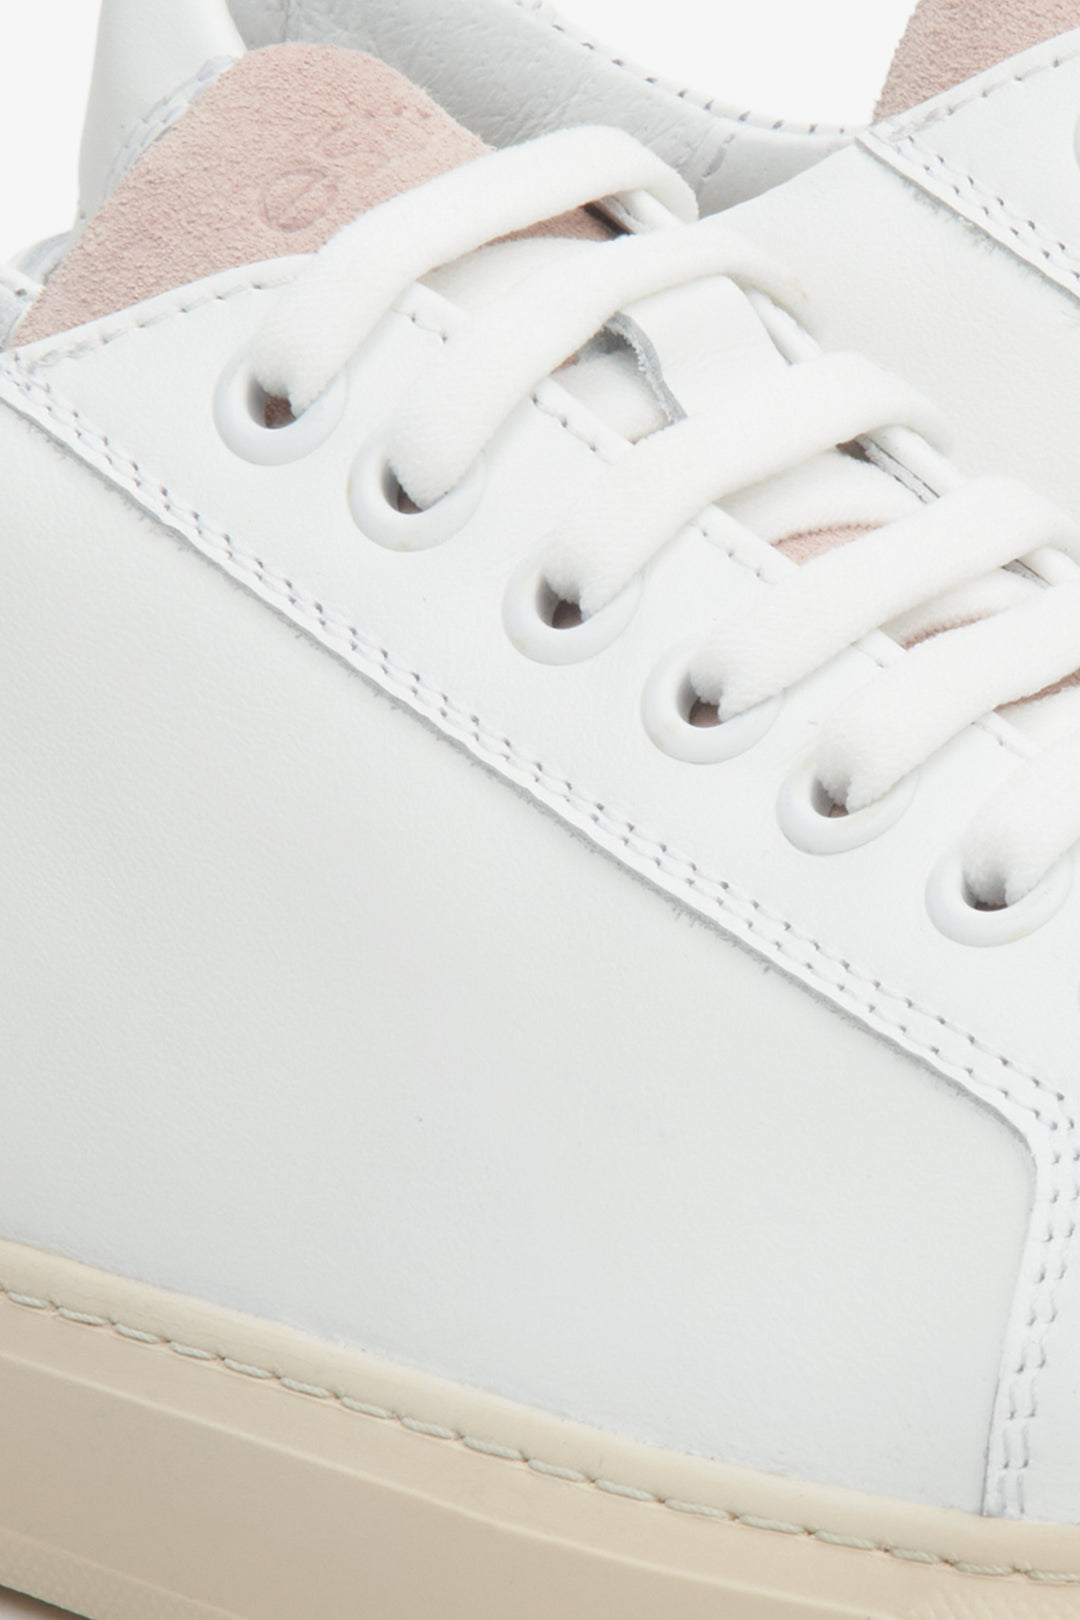 Women's white and pink sneakers made of genuine leather and velour - close-up on the lacing system.